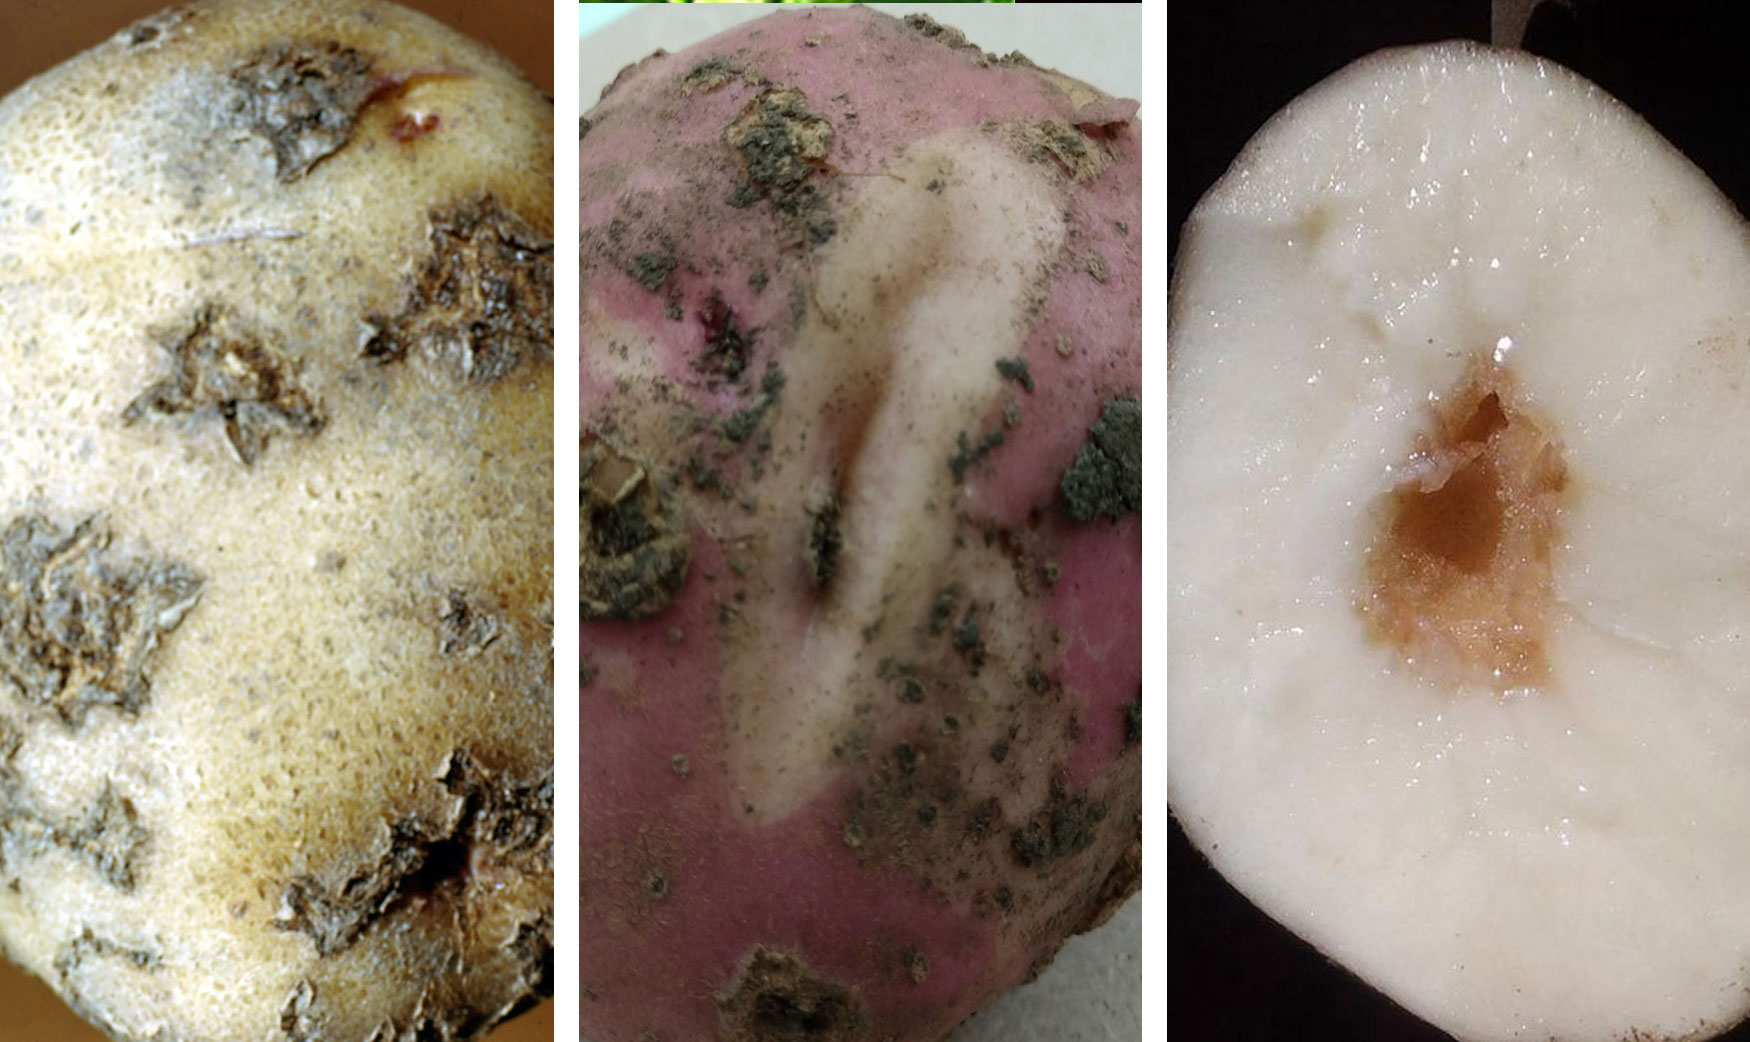 Three common potato issues. From left: Potato scab, knobbing and cracking, and hollow heart.